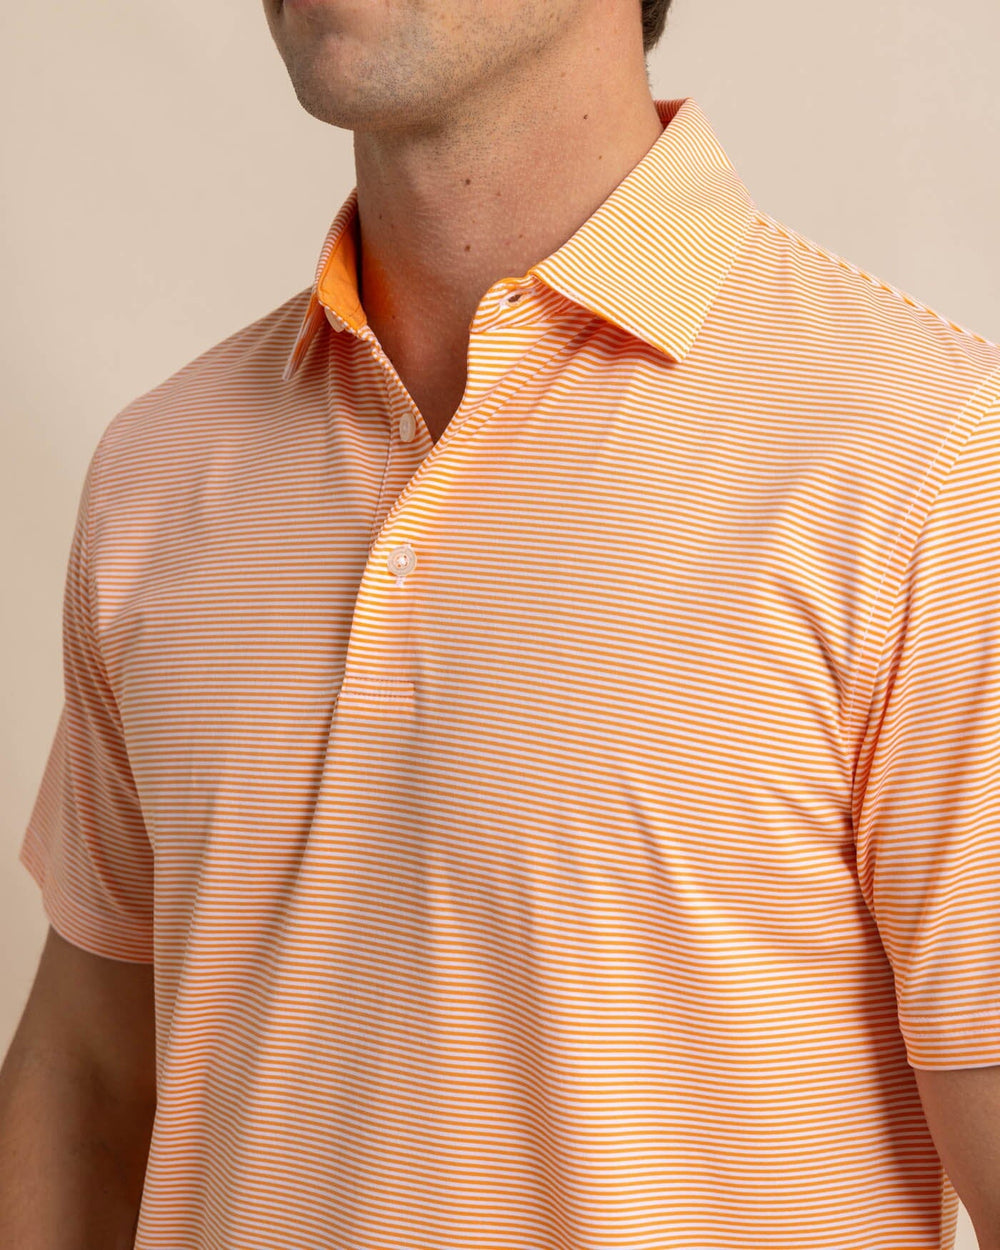 The detail view of the Southern Tide brrr-eeze-meadowbrook-stripe-polo by Southern Tide - Tangerine Orange